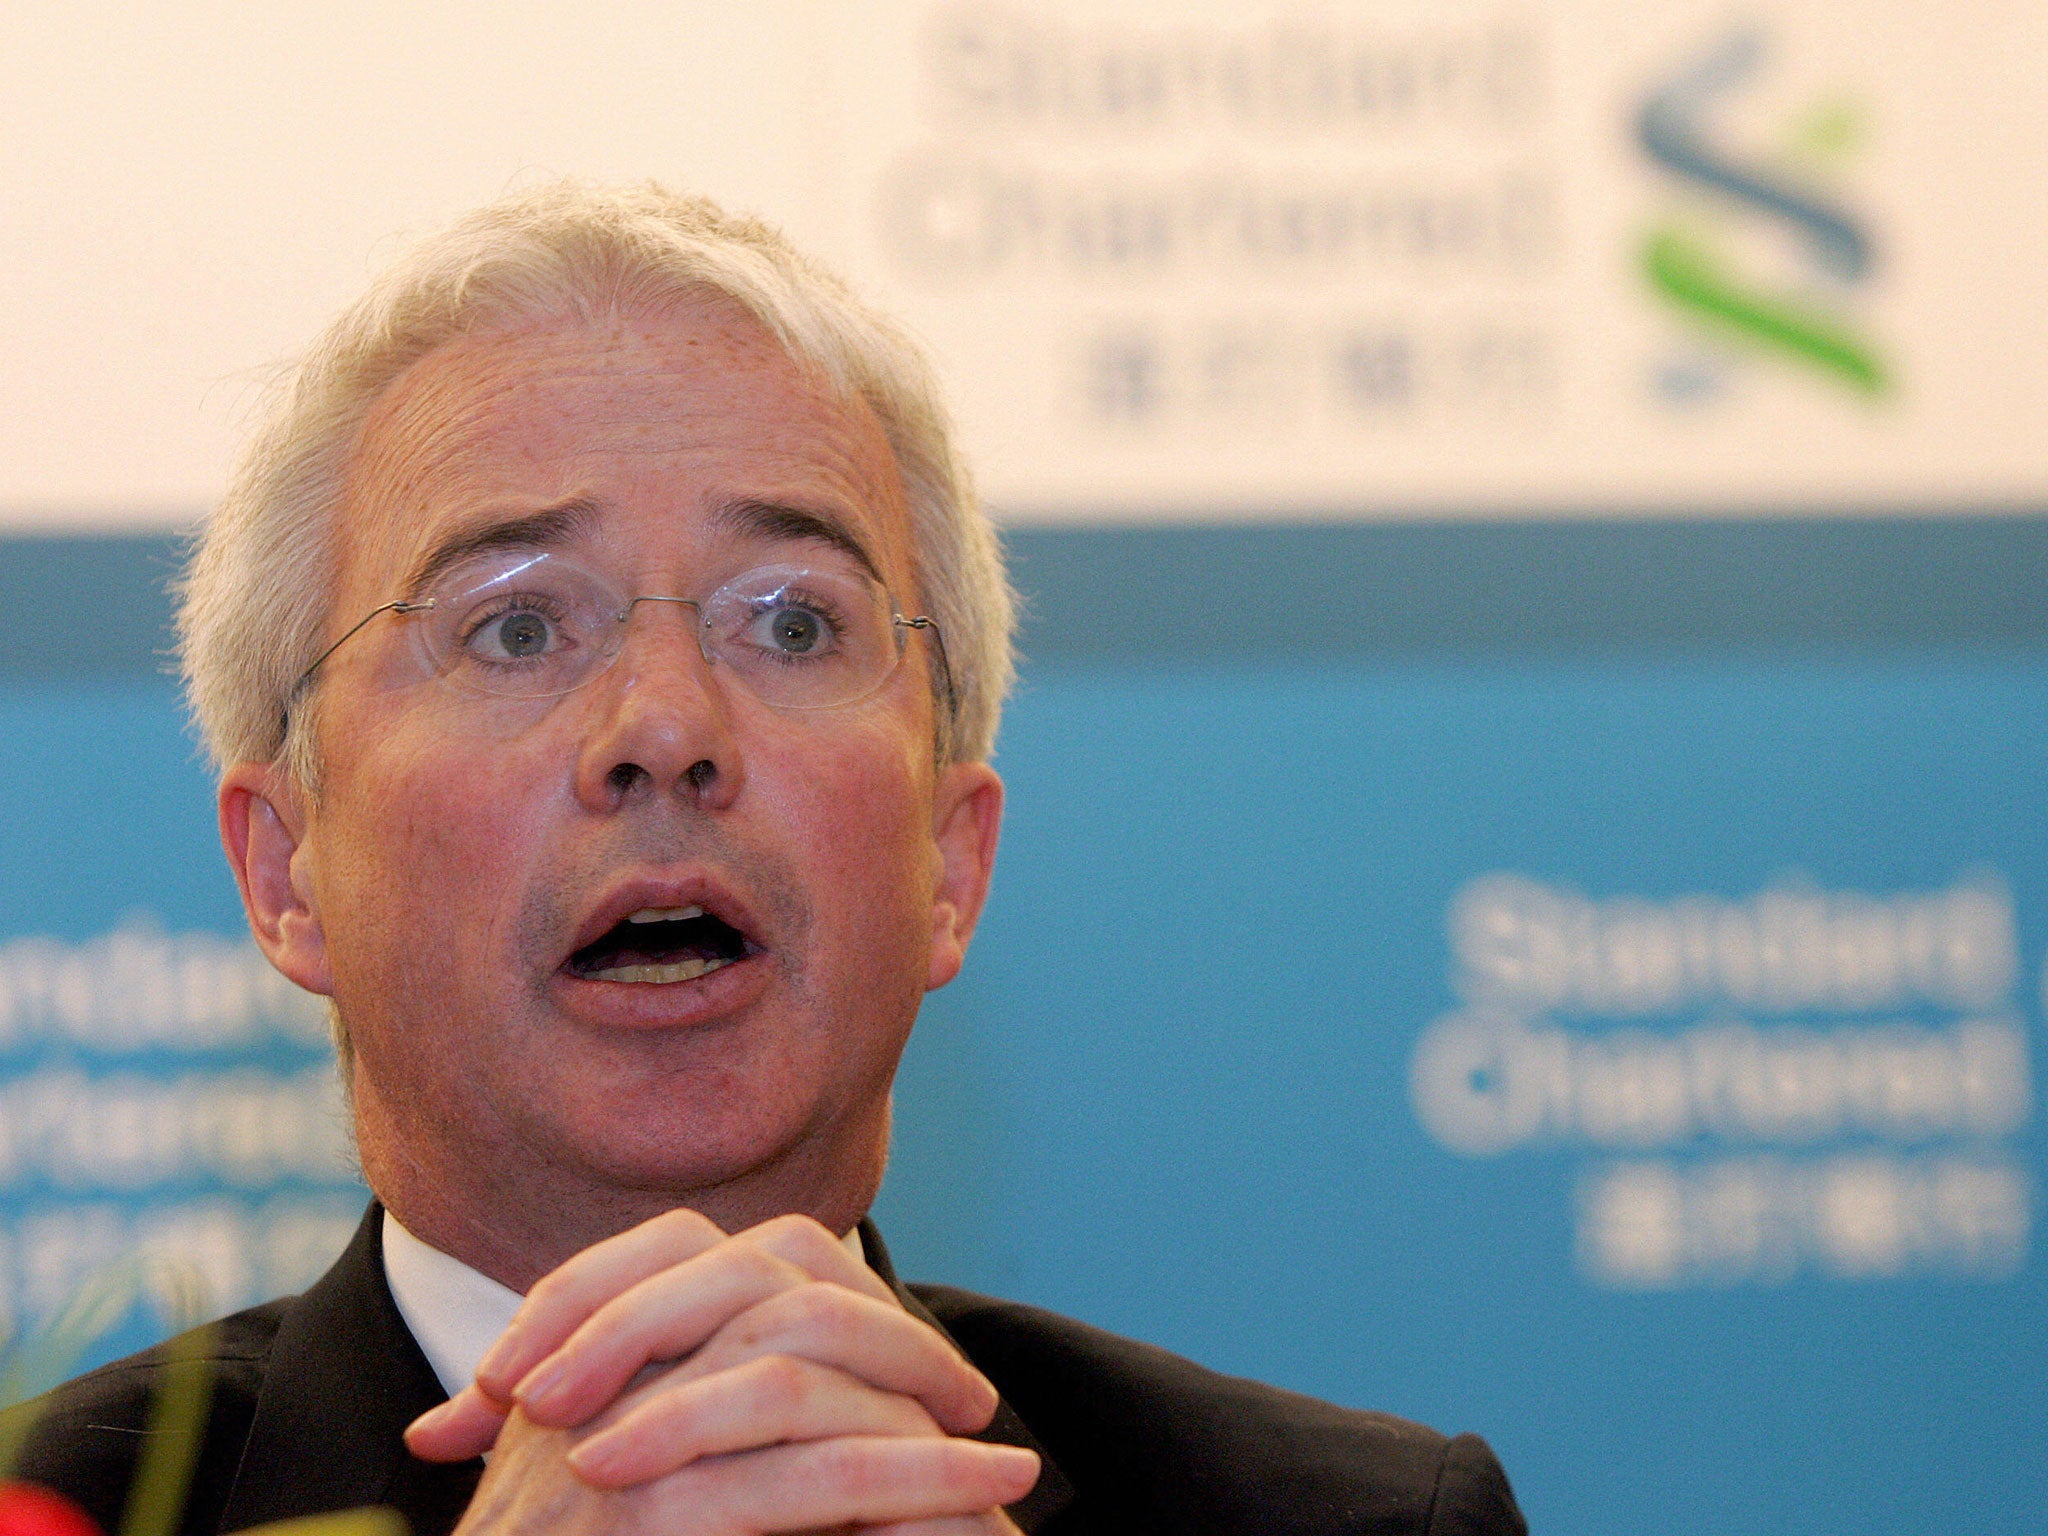 Peter Sands, the departing chief executive of Standard Chartered